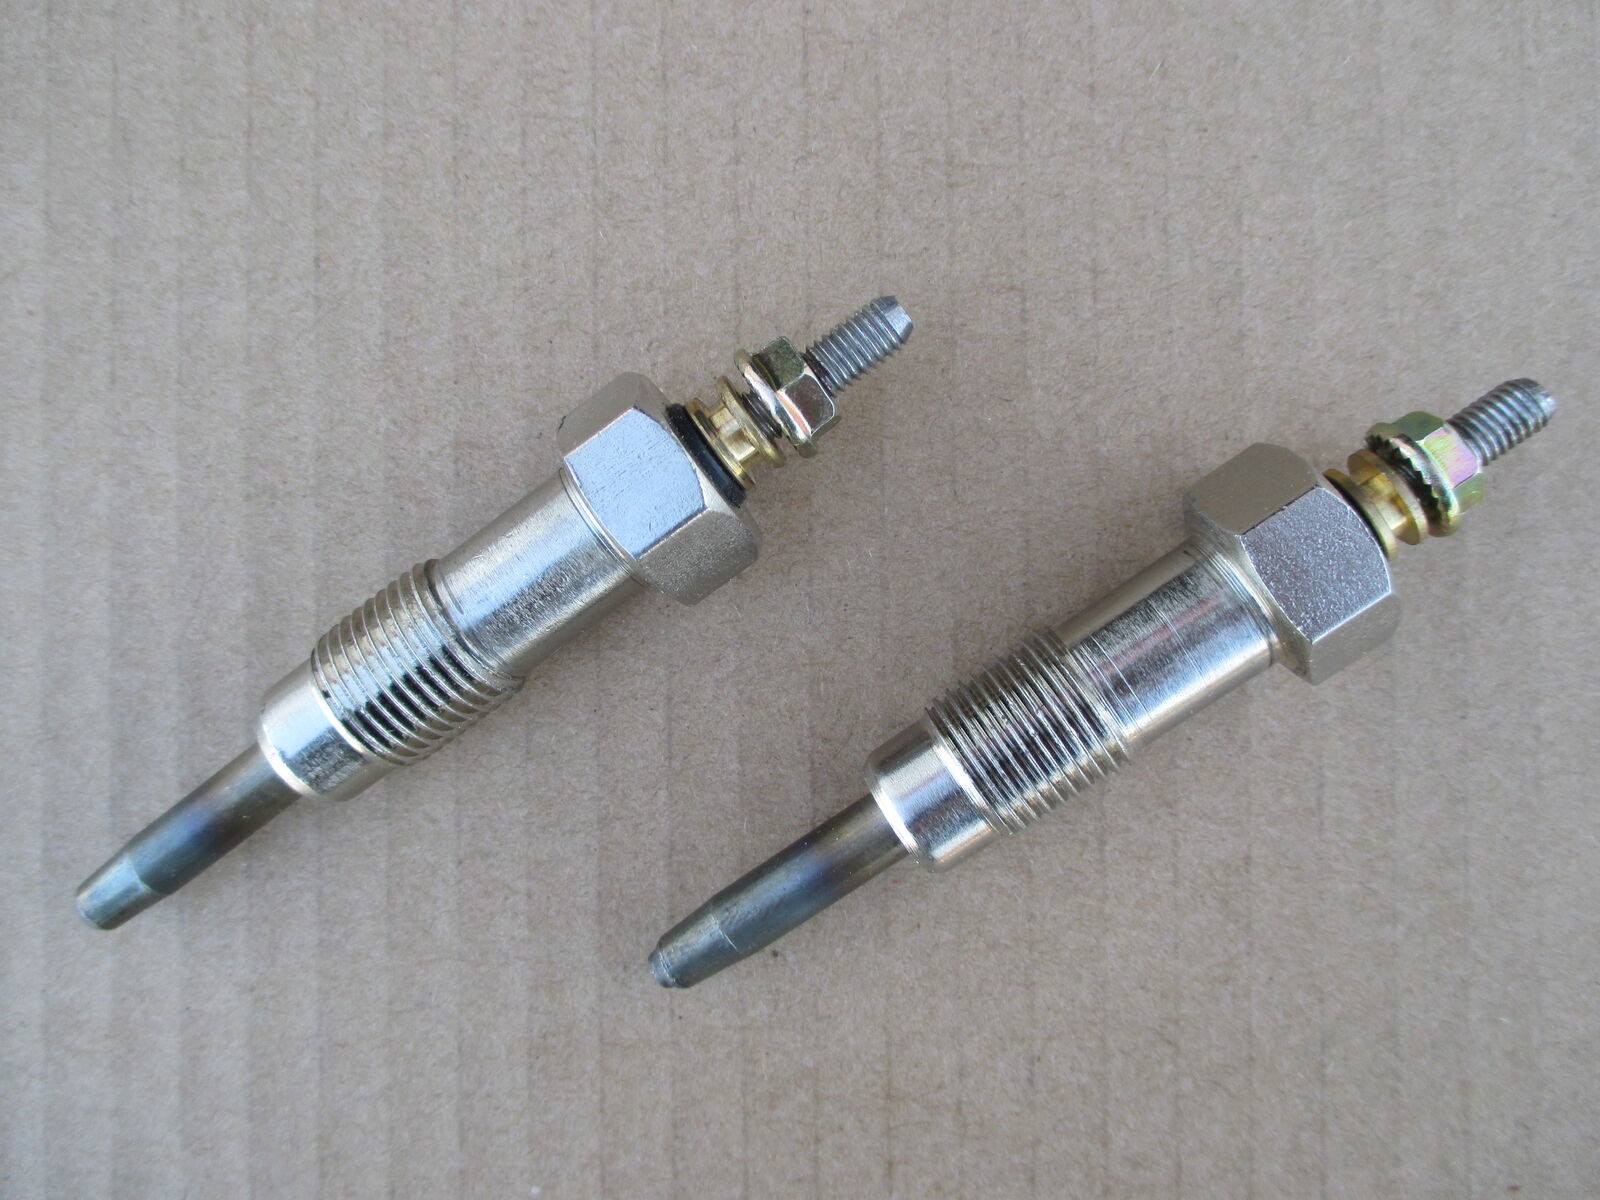 2 GLOW PLUGS FOR PART 0-250-200-048 67188 CH64 ELL70-0001 HDS224 SBA185366010